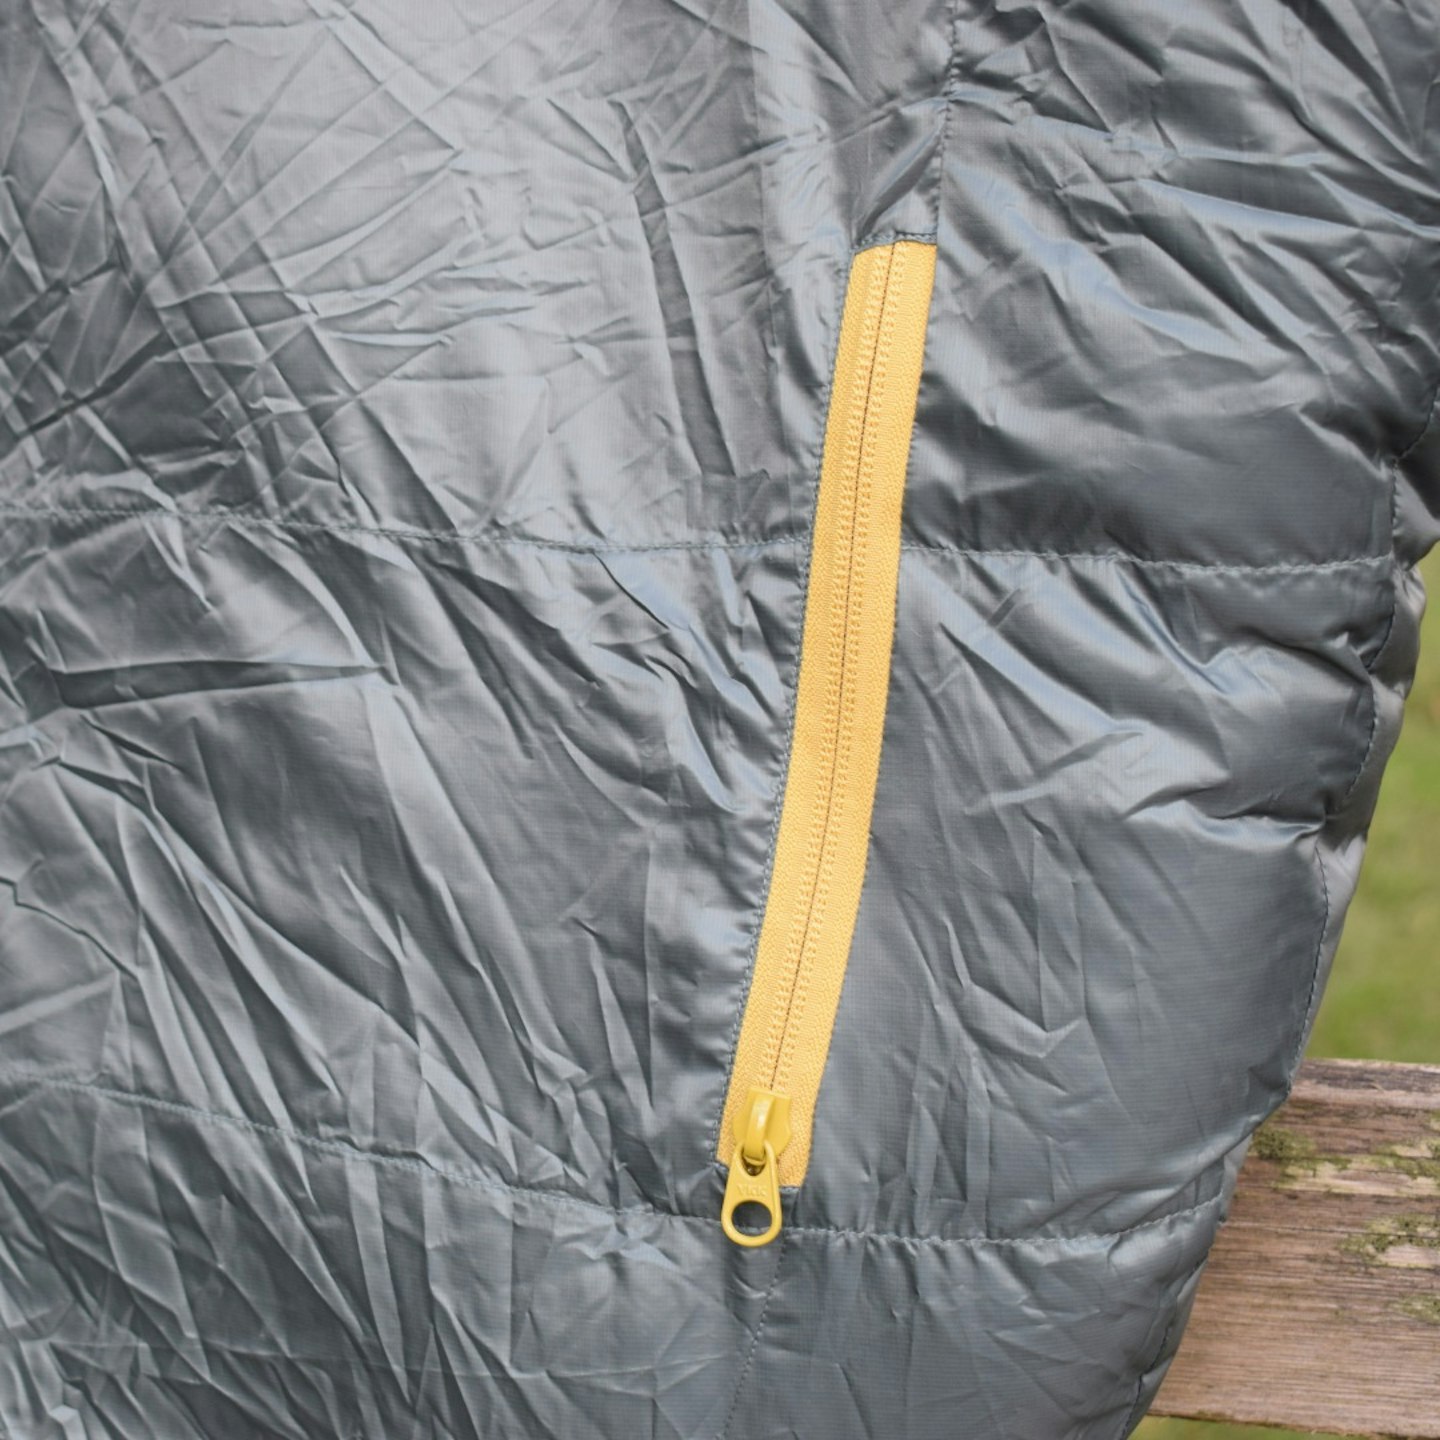 Therm-a-Rest Questar 20F/-6C Down Sleeping Bag security pocket